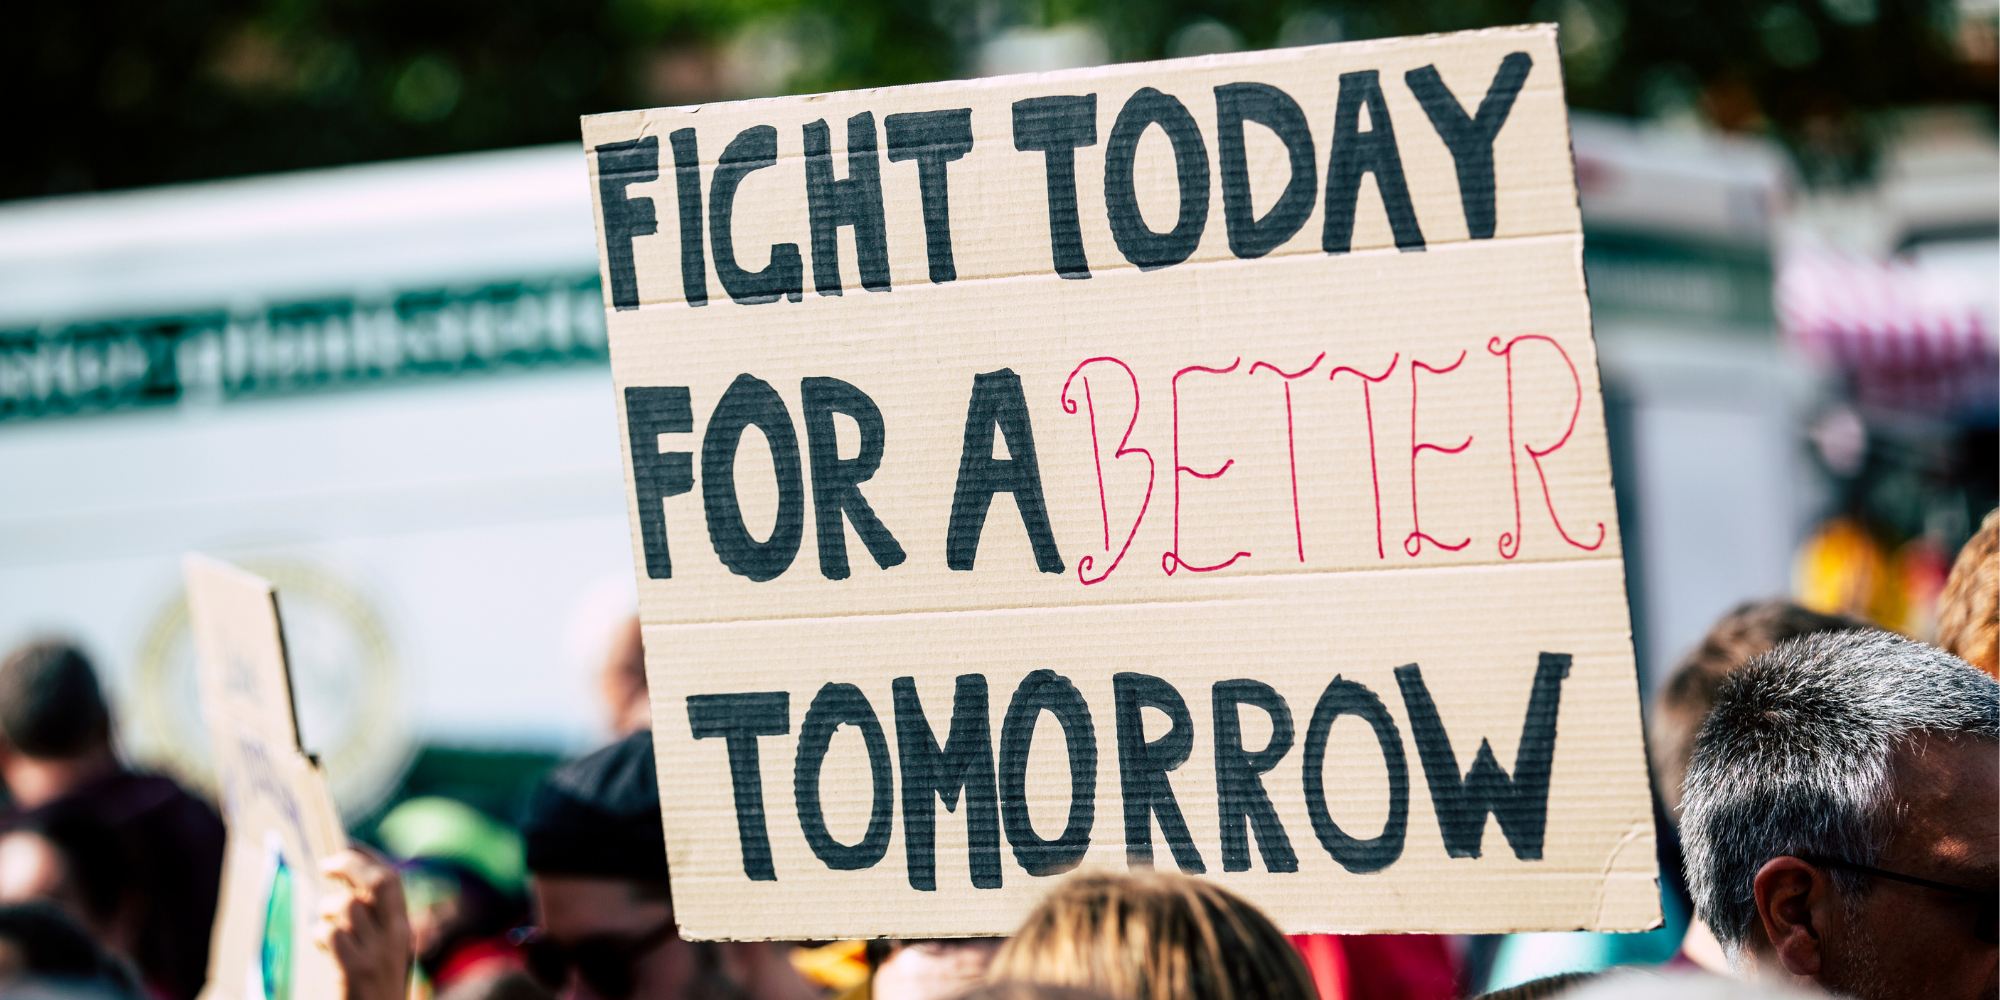 The words "fight today for a better tomorrow" written on a cardboard sign held by someone in a crowd